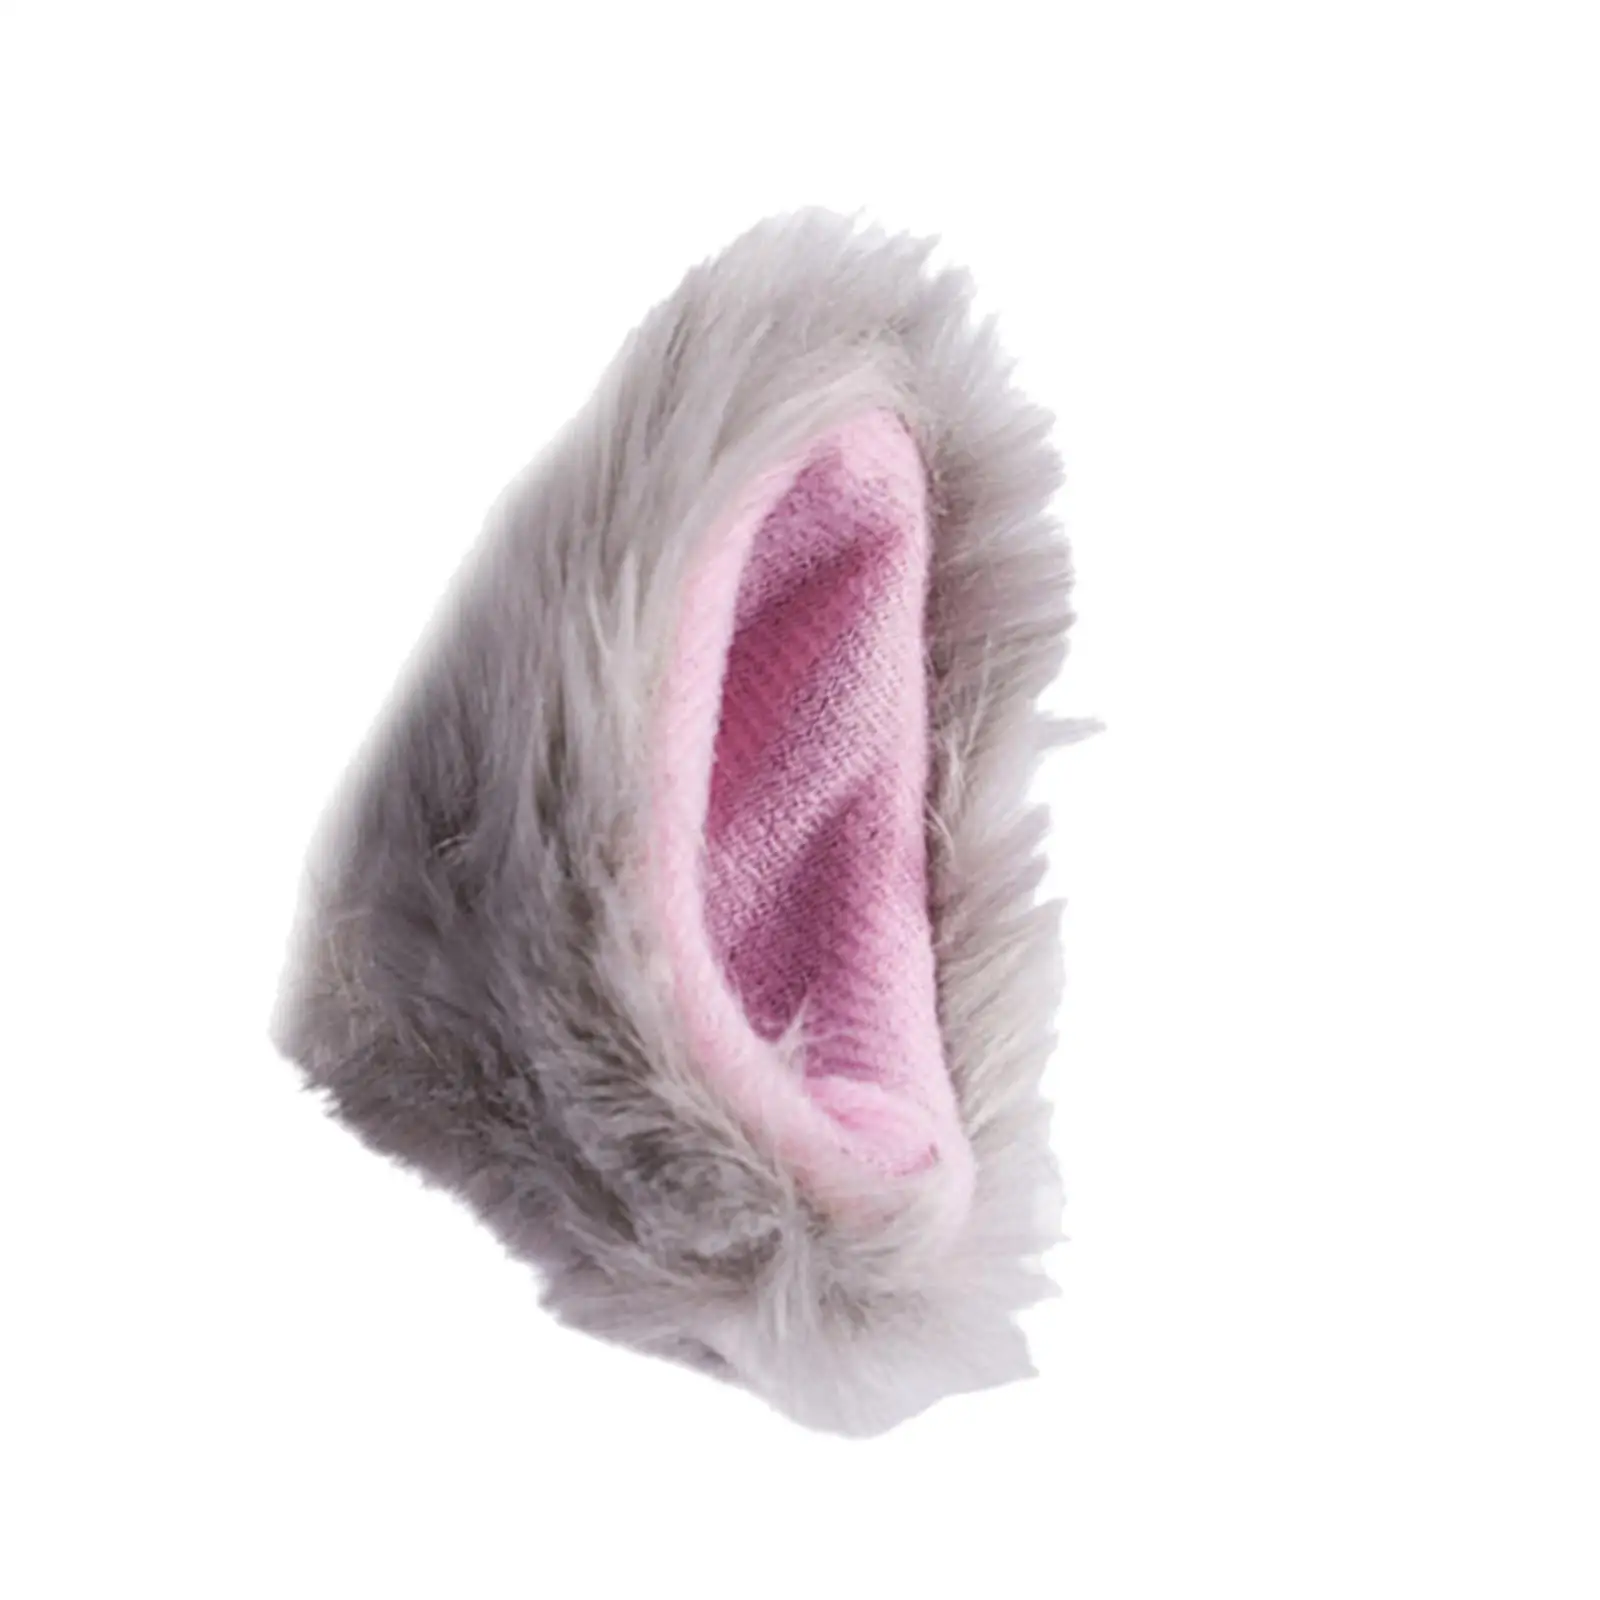 Plush Ear Decor Bicycle Scooter Helmet Accessory Self Adhesive Funny